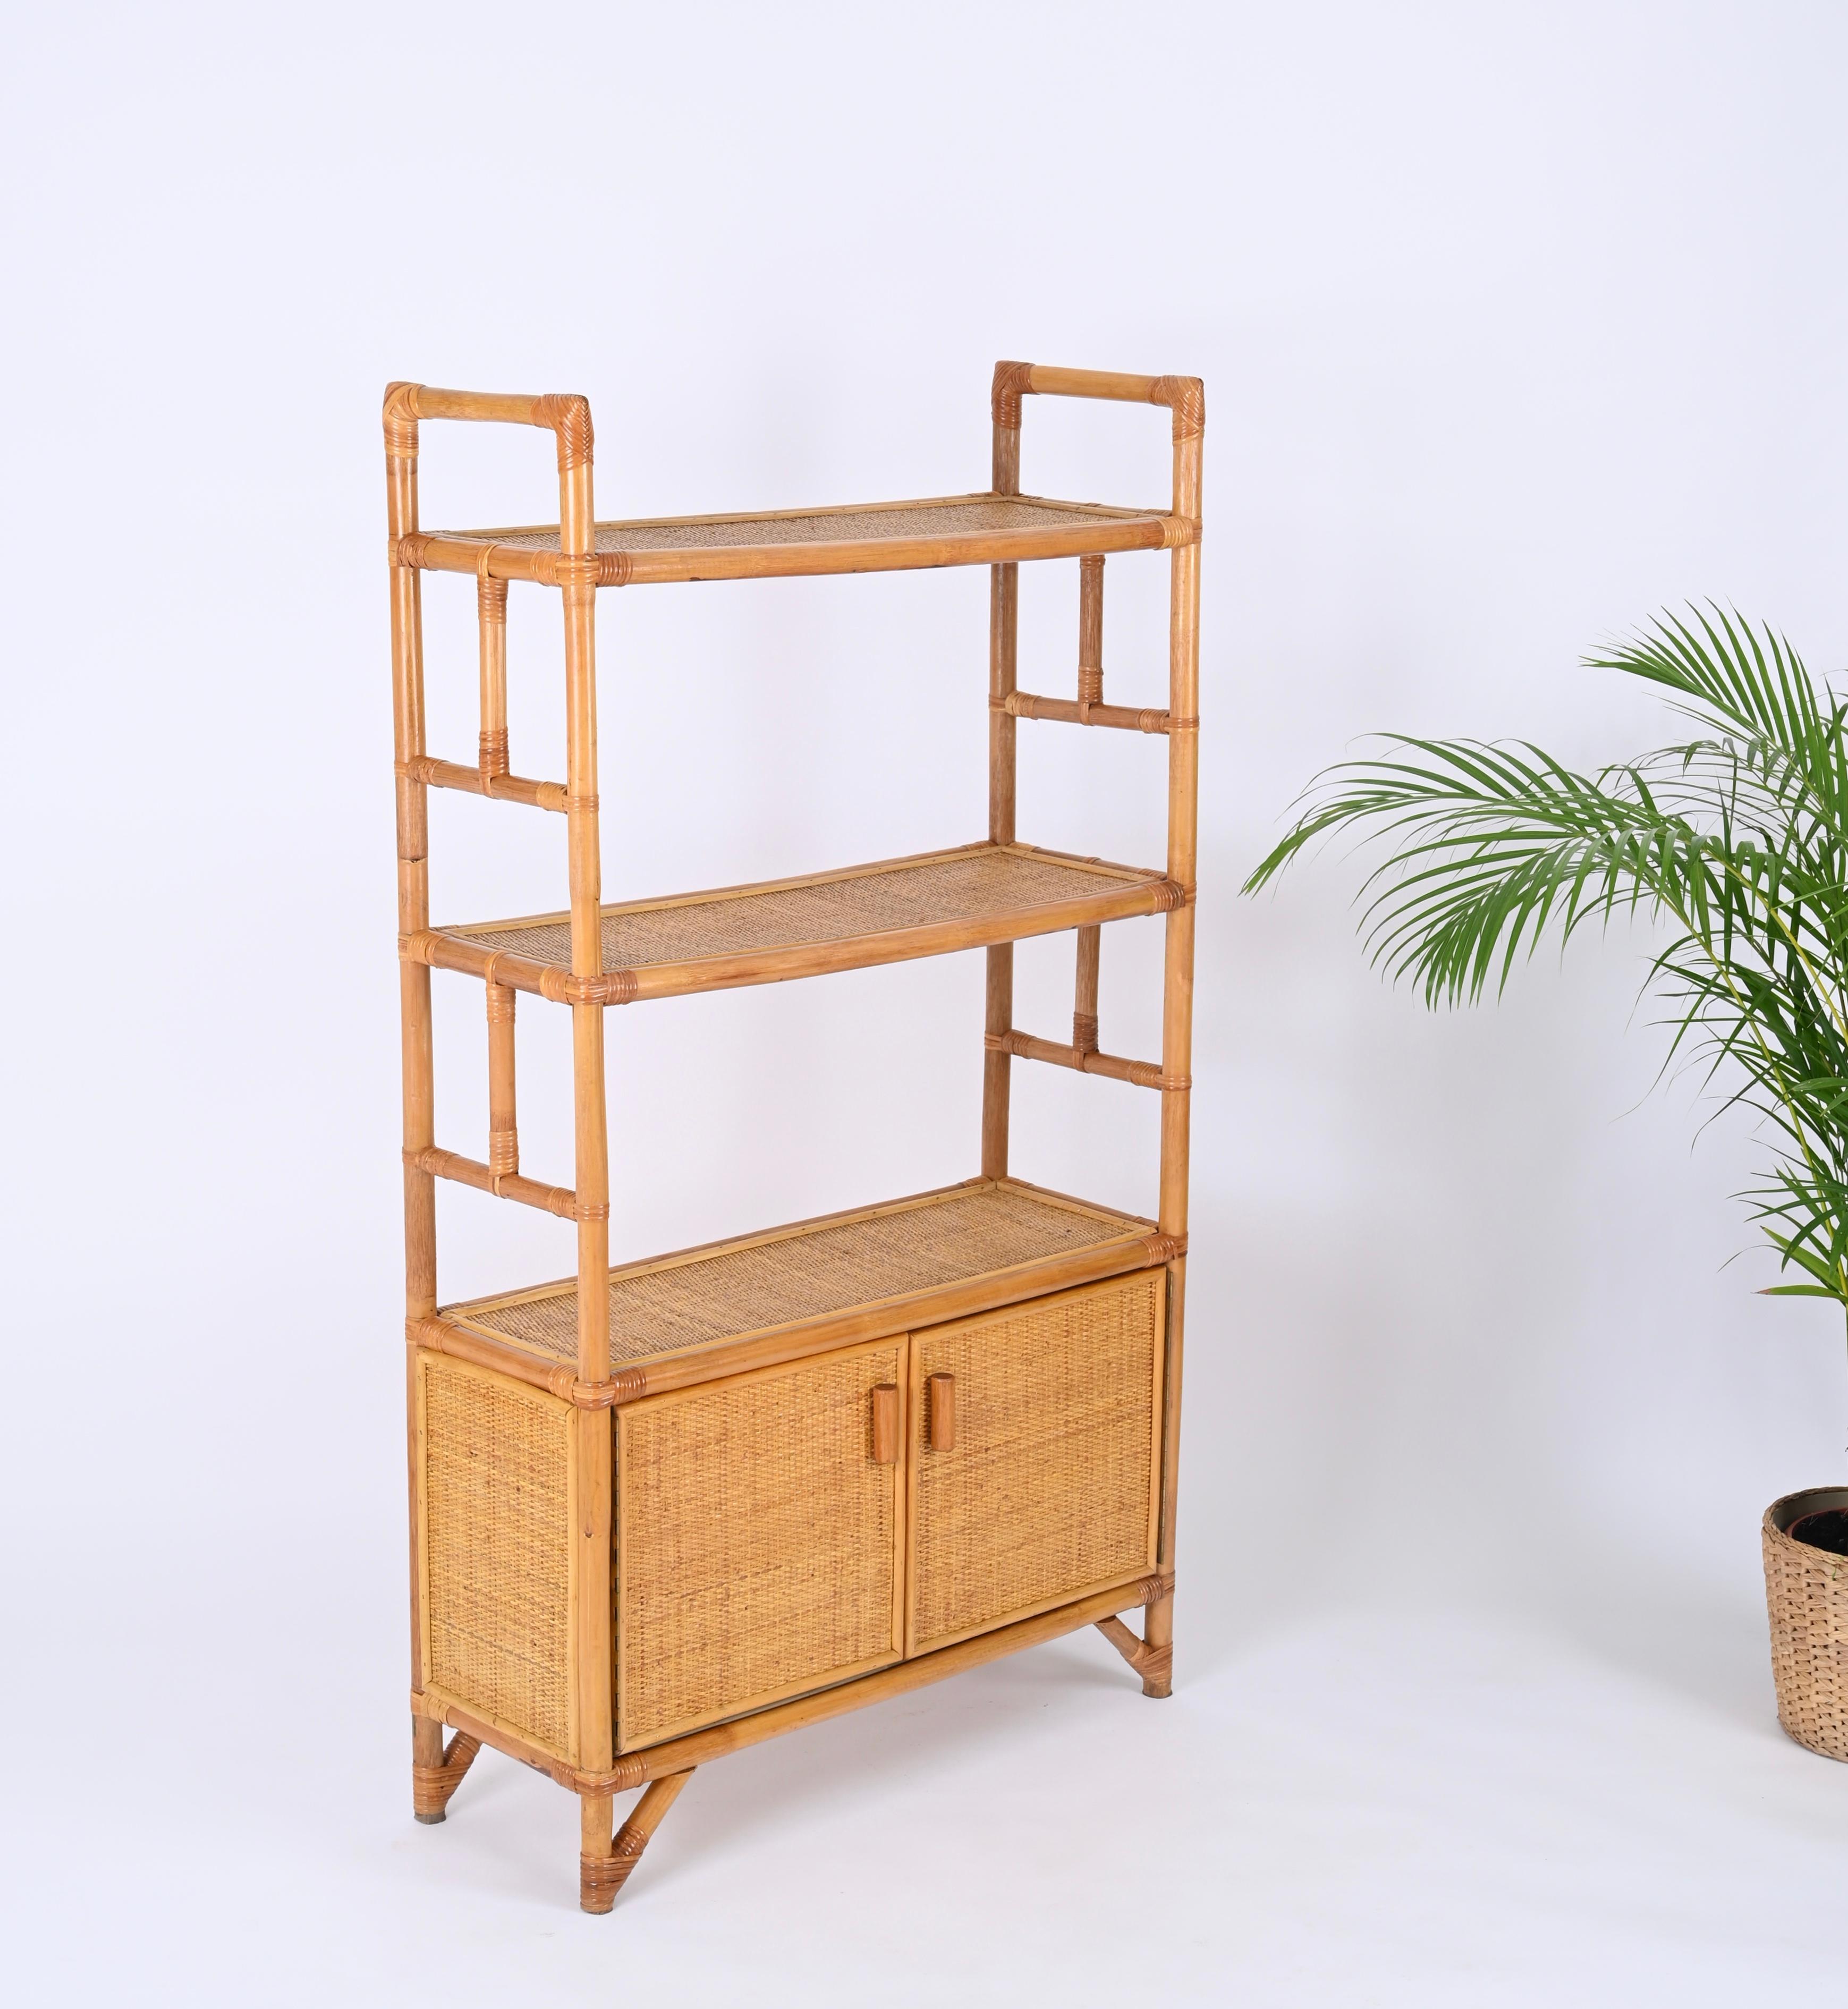 Midcentury Italian Modern Rattan and Bamboo Bookcase with Doors, 1970s For Sale 3